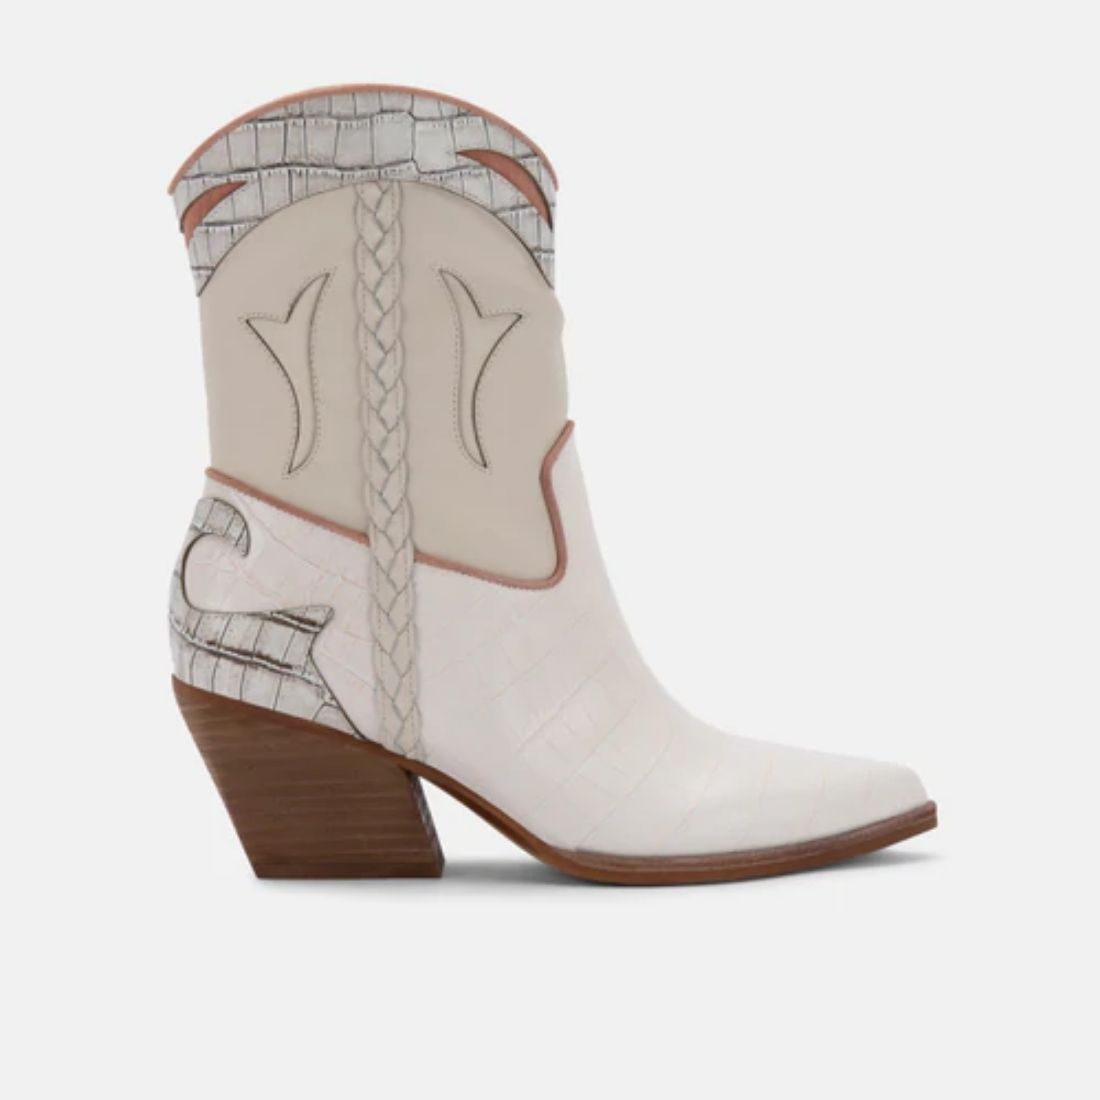 dolce vita loral cowboy boot in ivory croco leather 108257